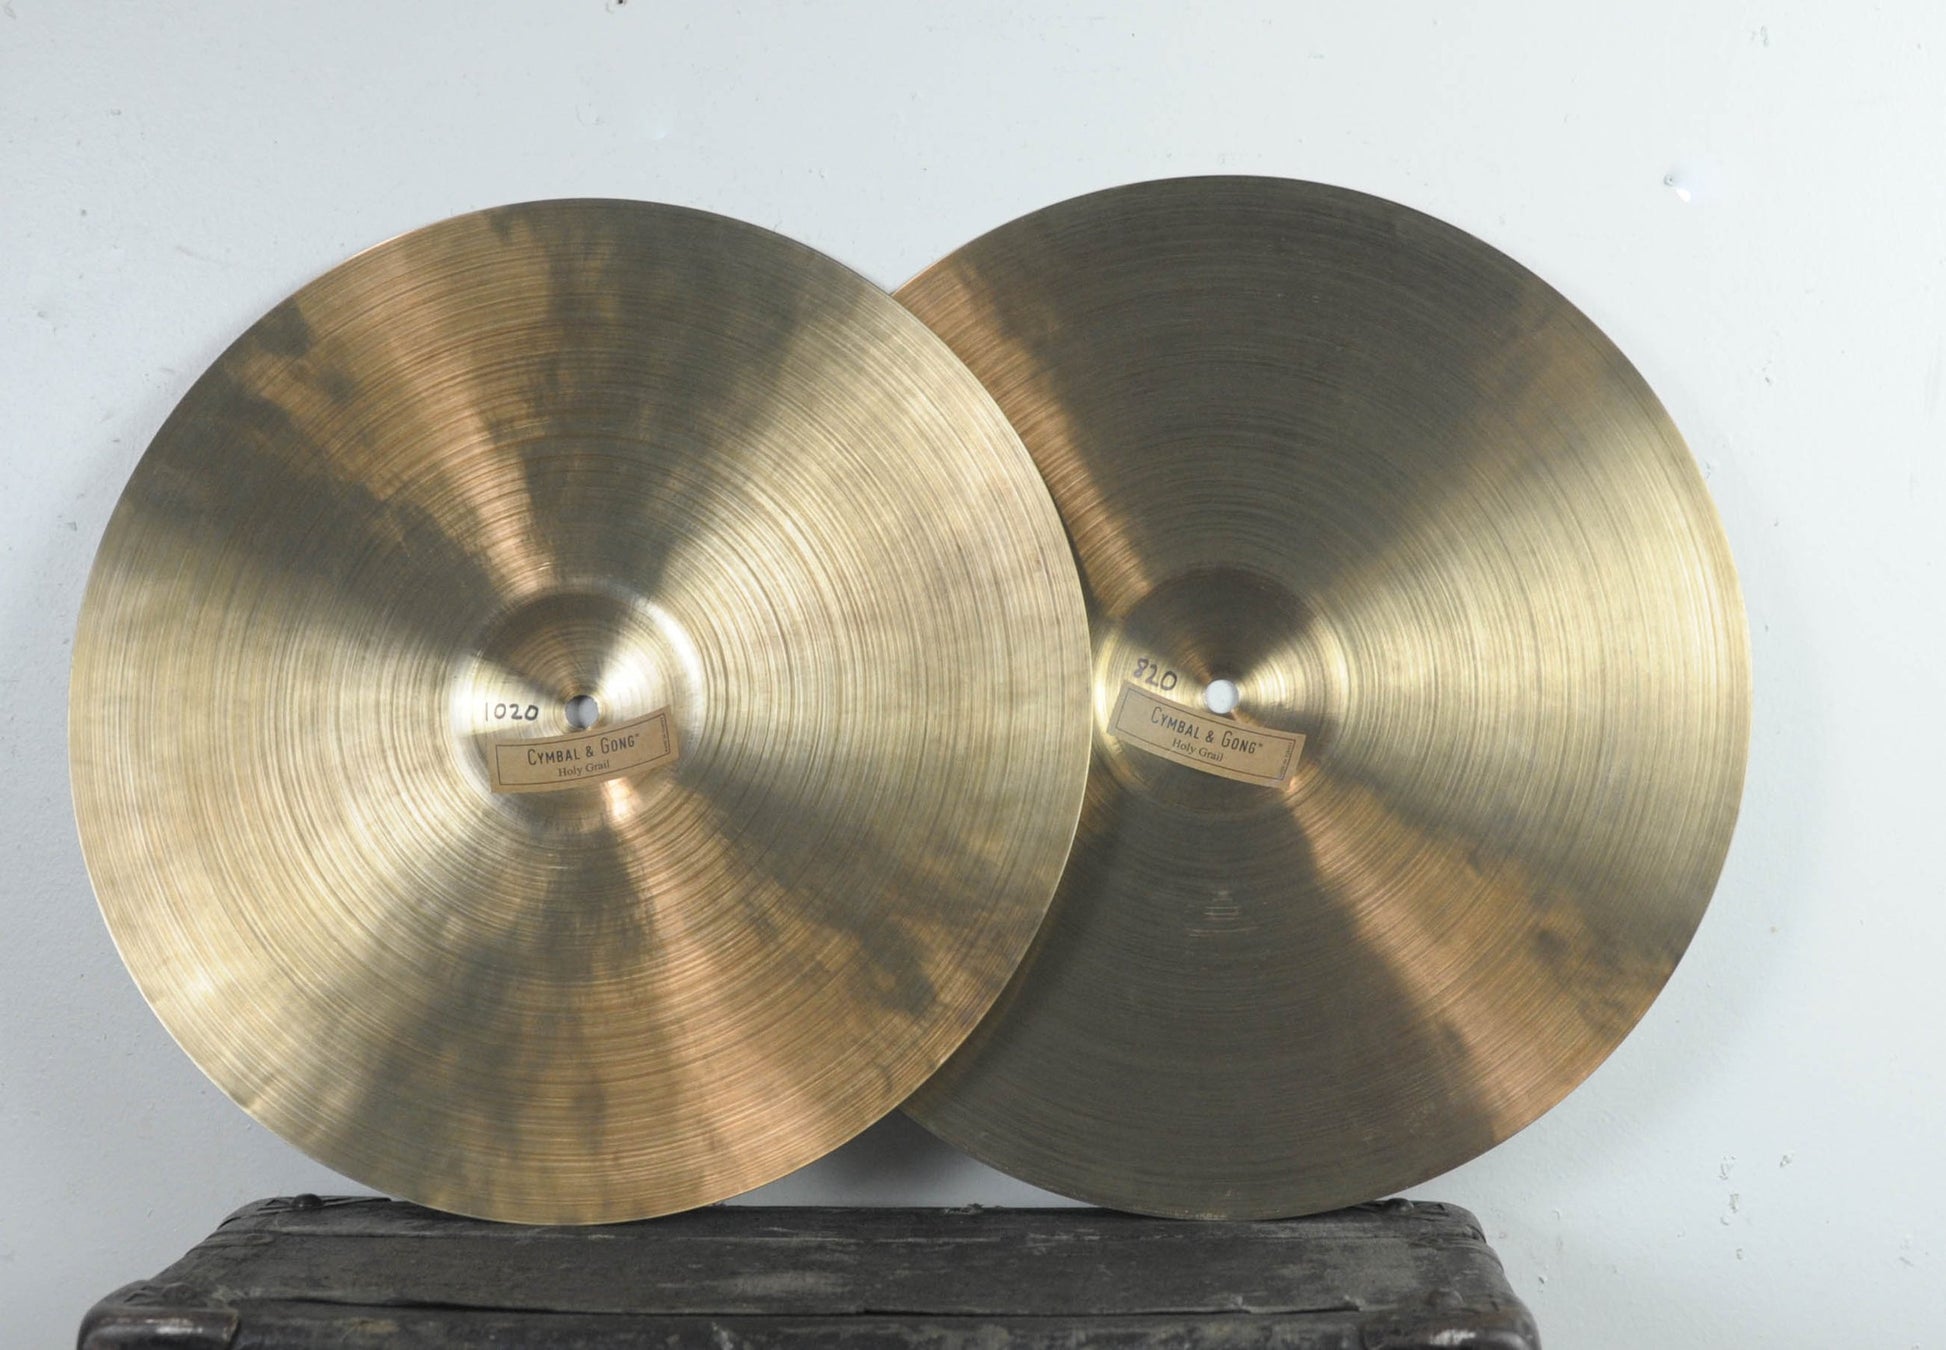 Cymbal and Gong 15" Holy Grail Ride Hi Hat Cymbals 820g 1020g